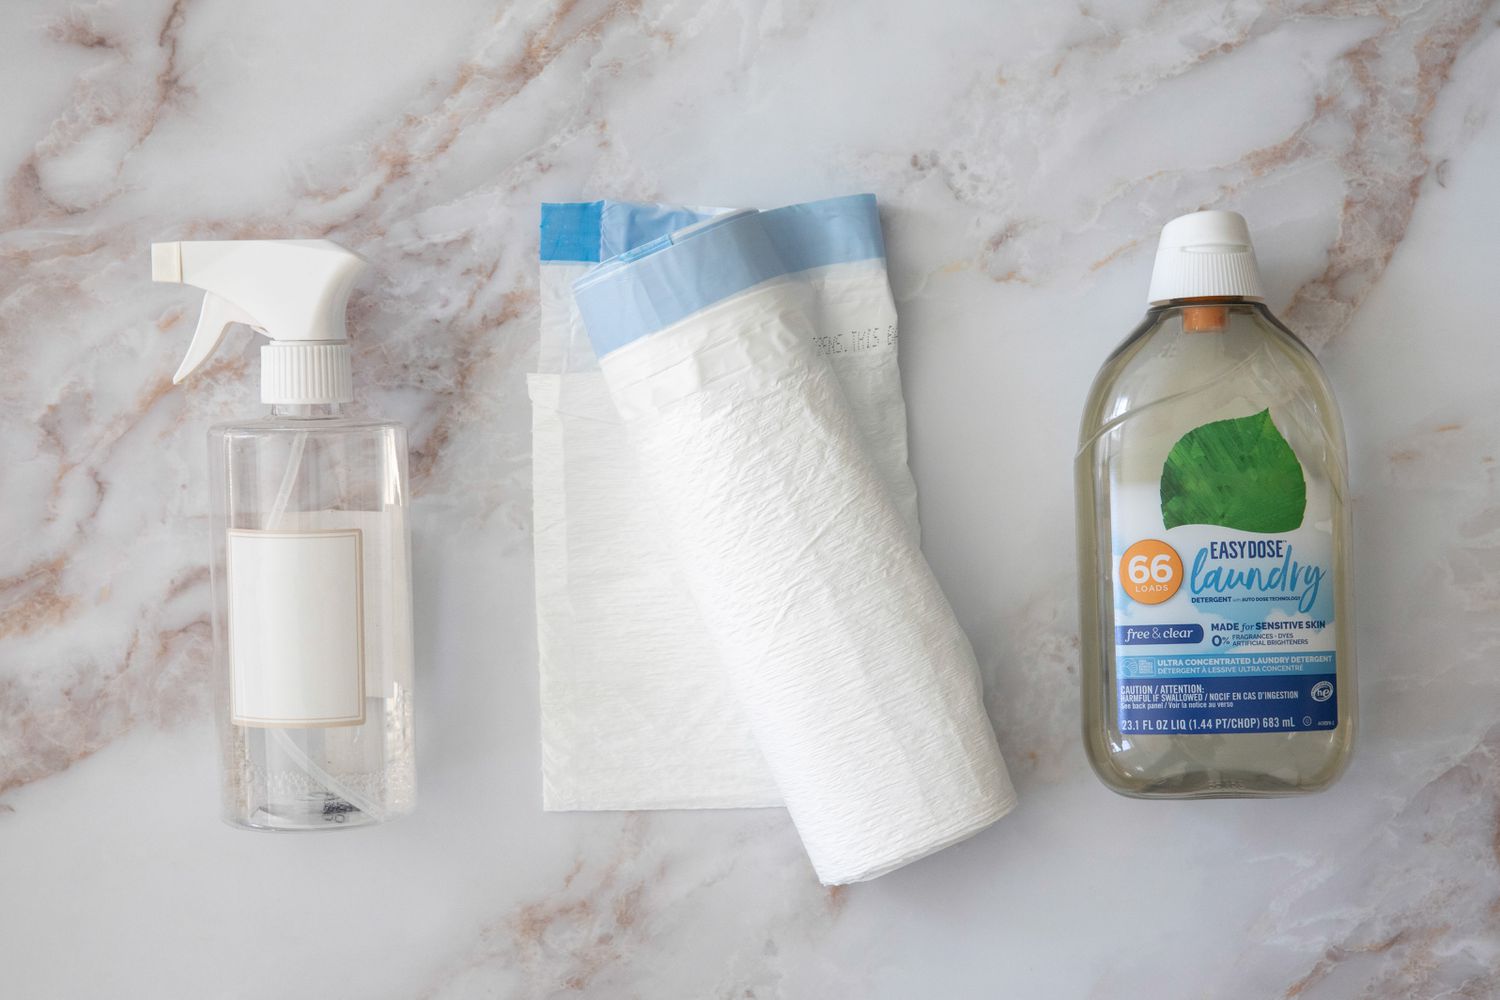 Glass spray bottle next to roll of plastic trash bag and laundry detergent bottle